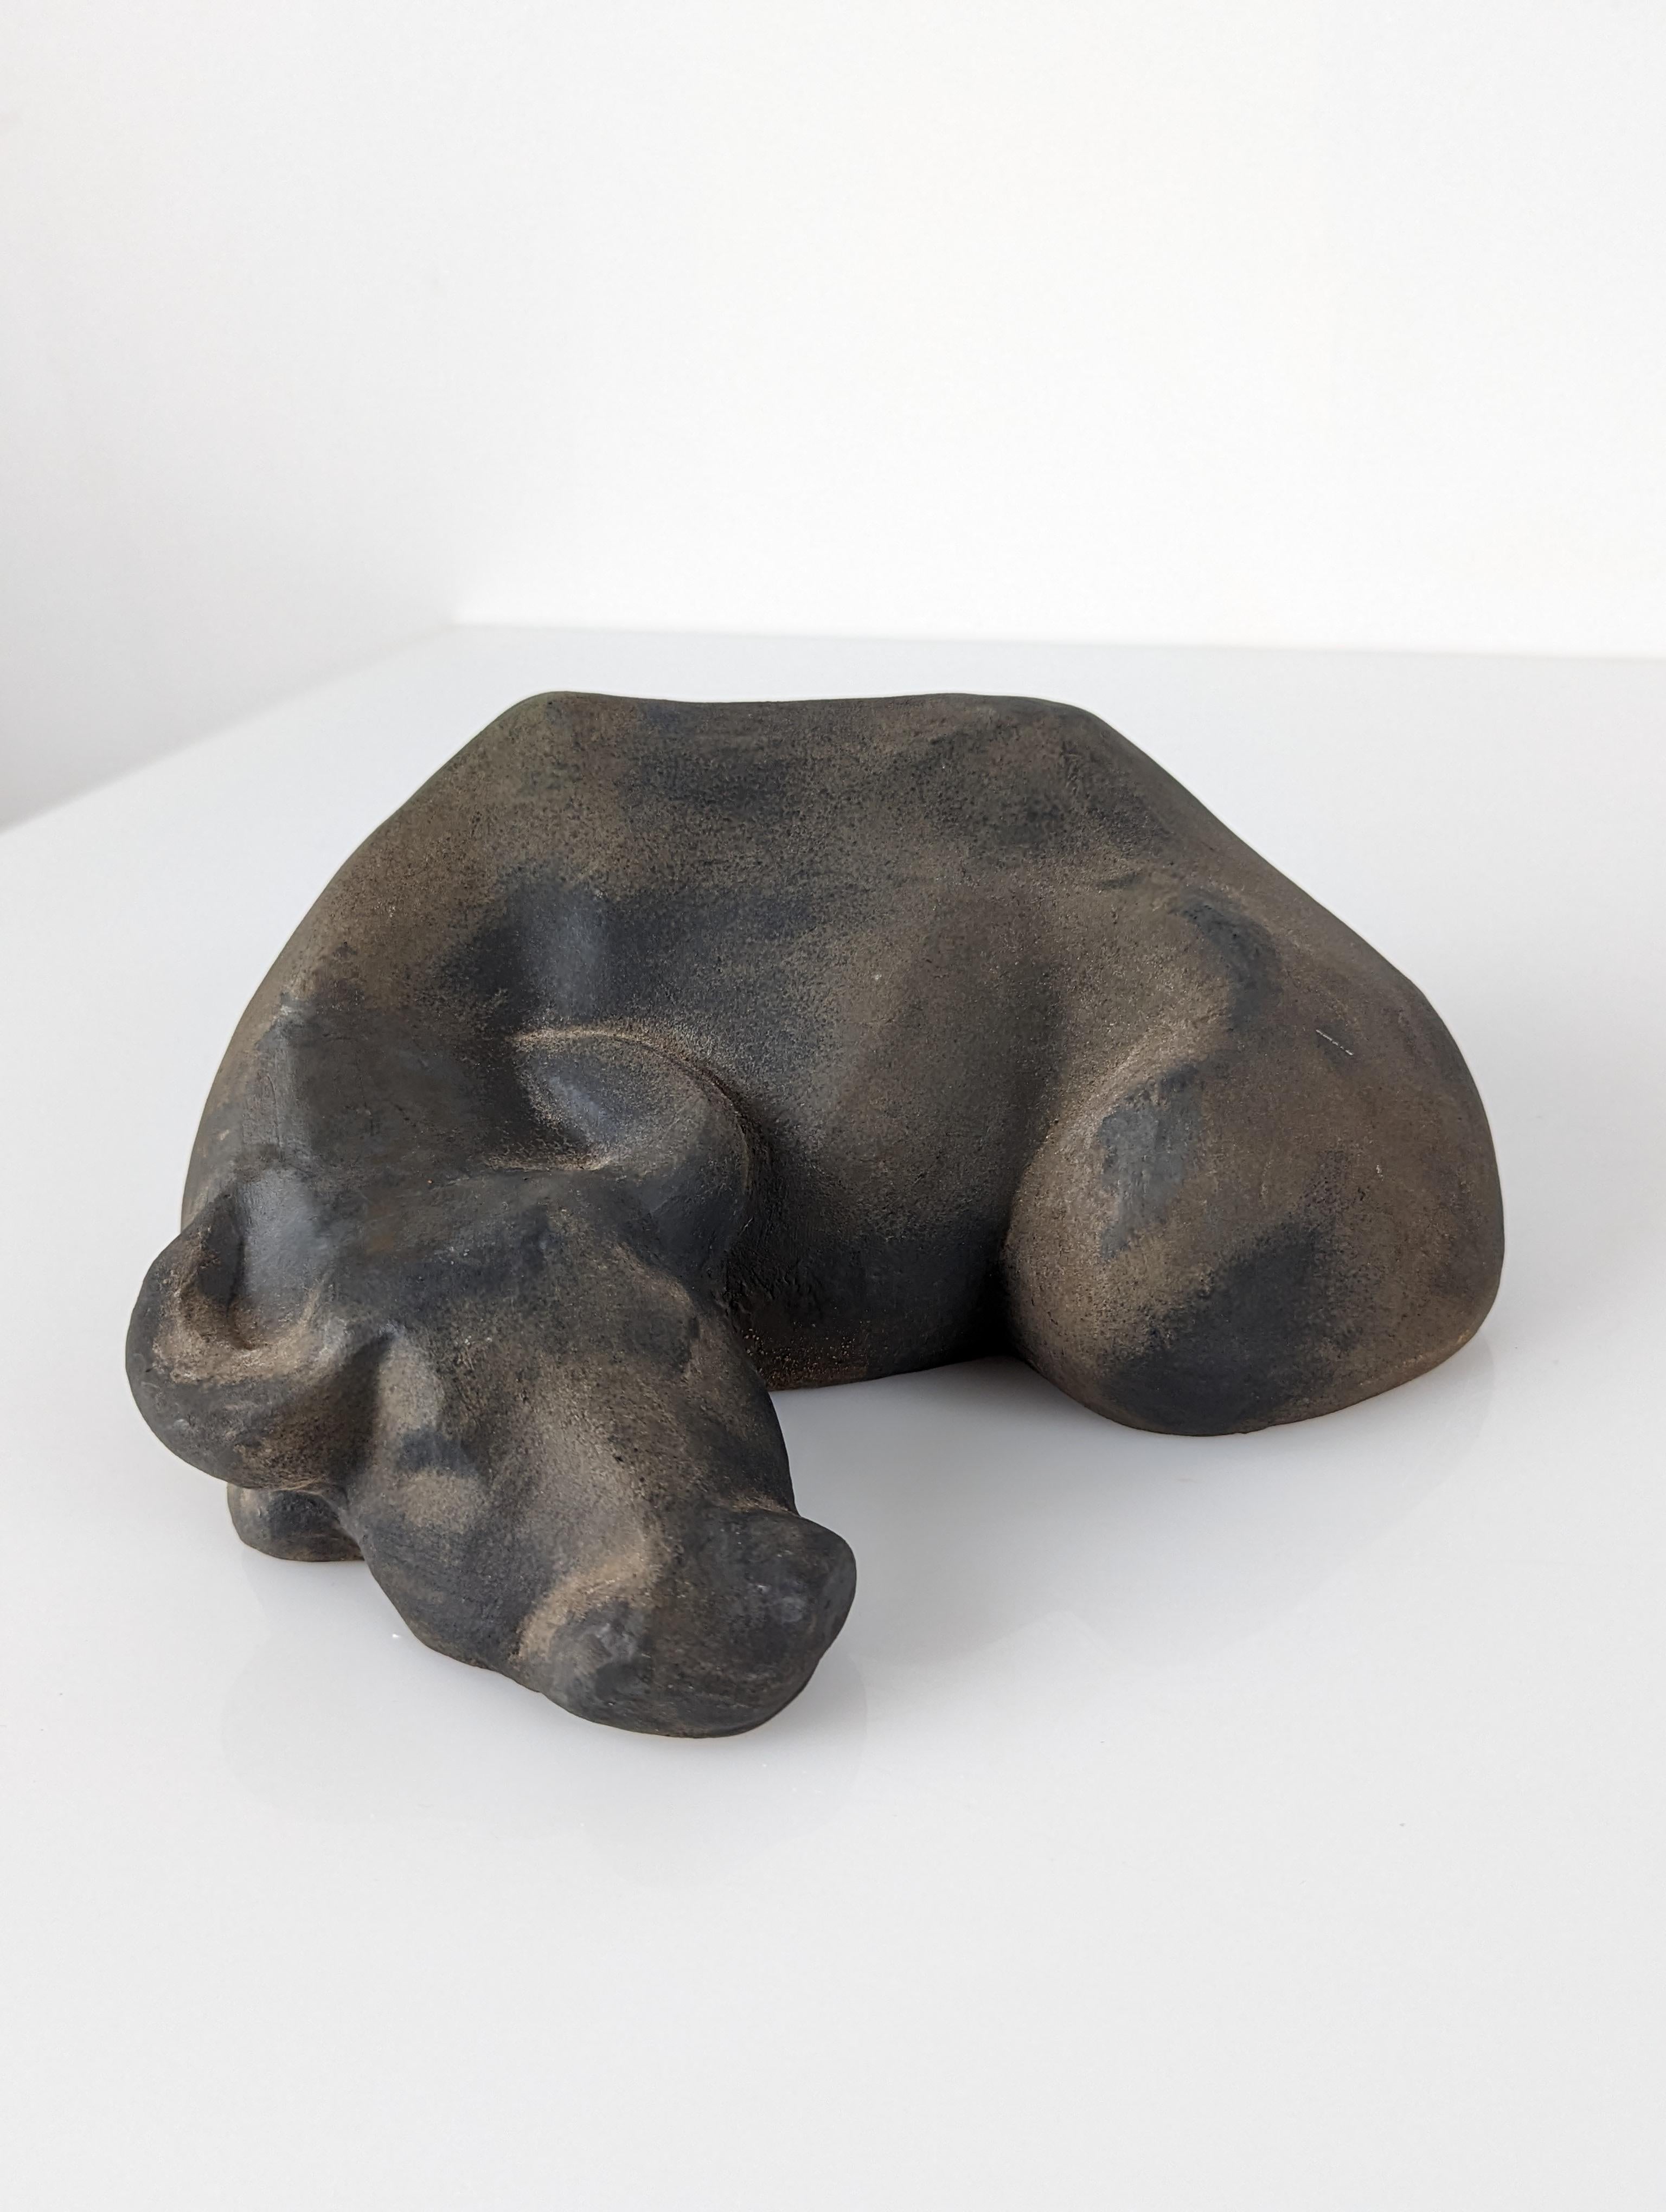 Wonderful ceramic sculpture by the great Spanish artist Elena Laverón. Depicting a Water Buffalo resting, even asleep. A masterful piece that conveys great peace and creates a relaxing atmosphere around you. Thanks to her particular way of